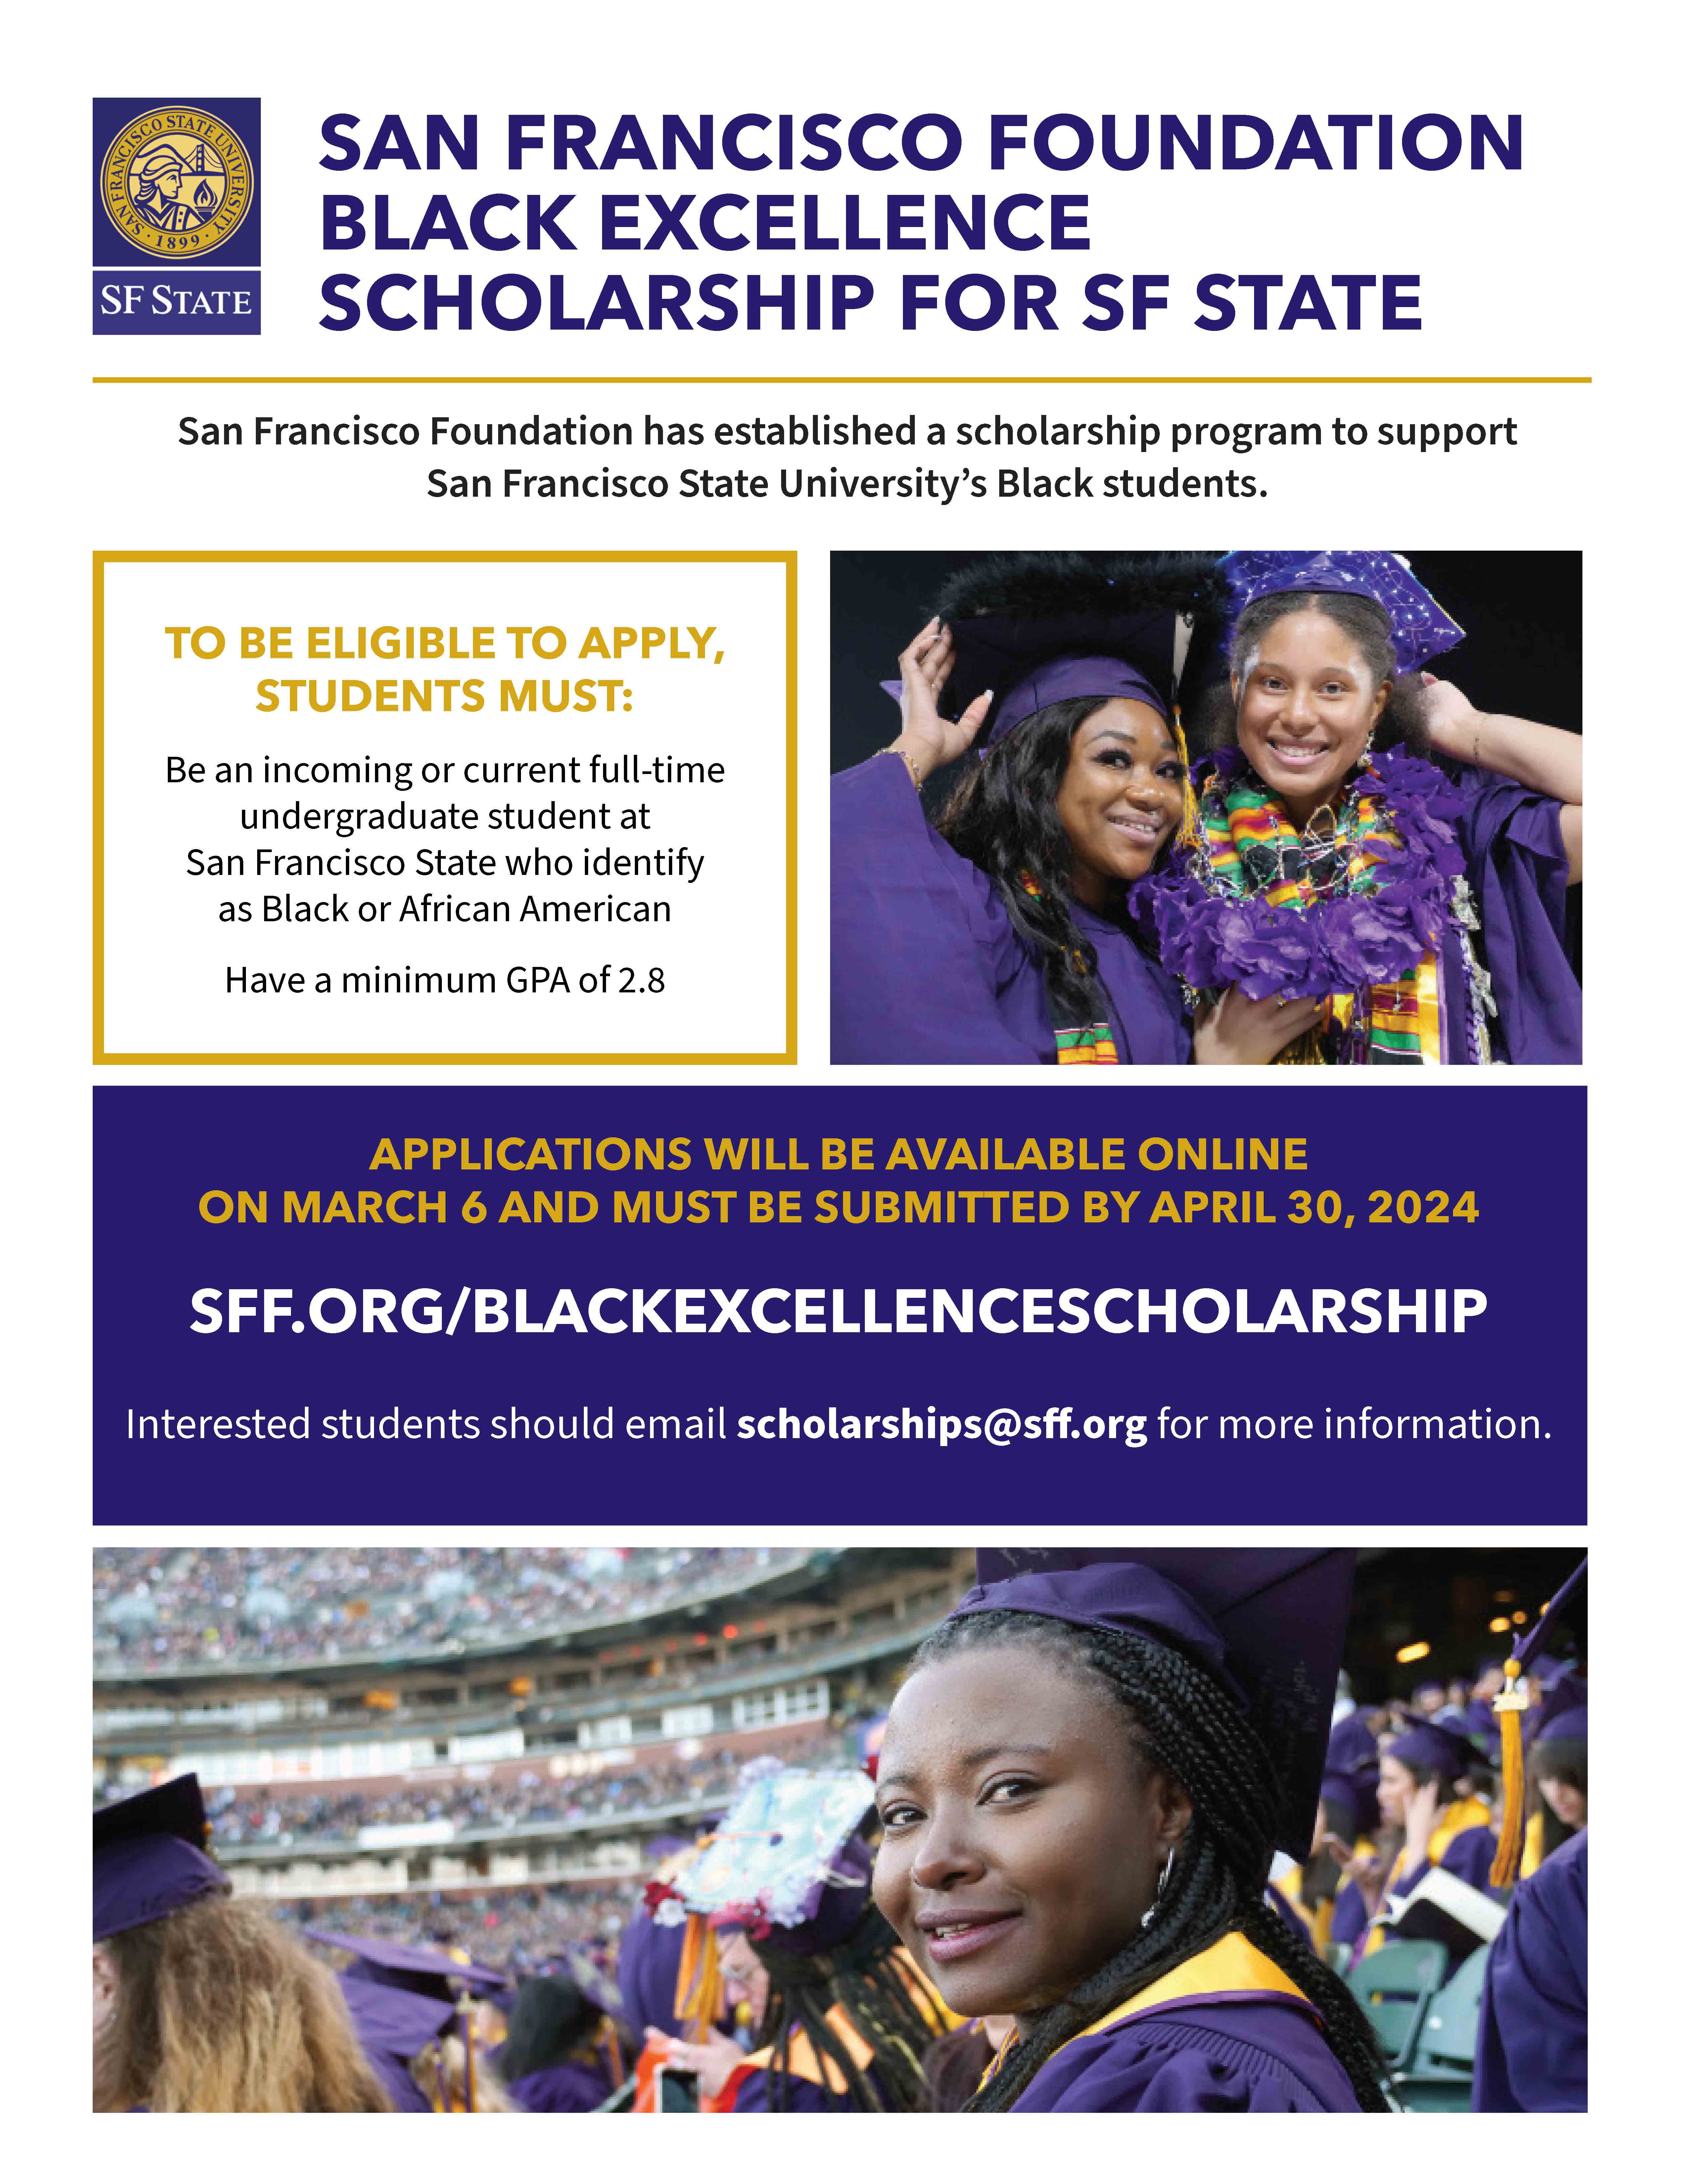 Black Excellence Scholarship for san Francisco State University